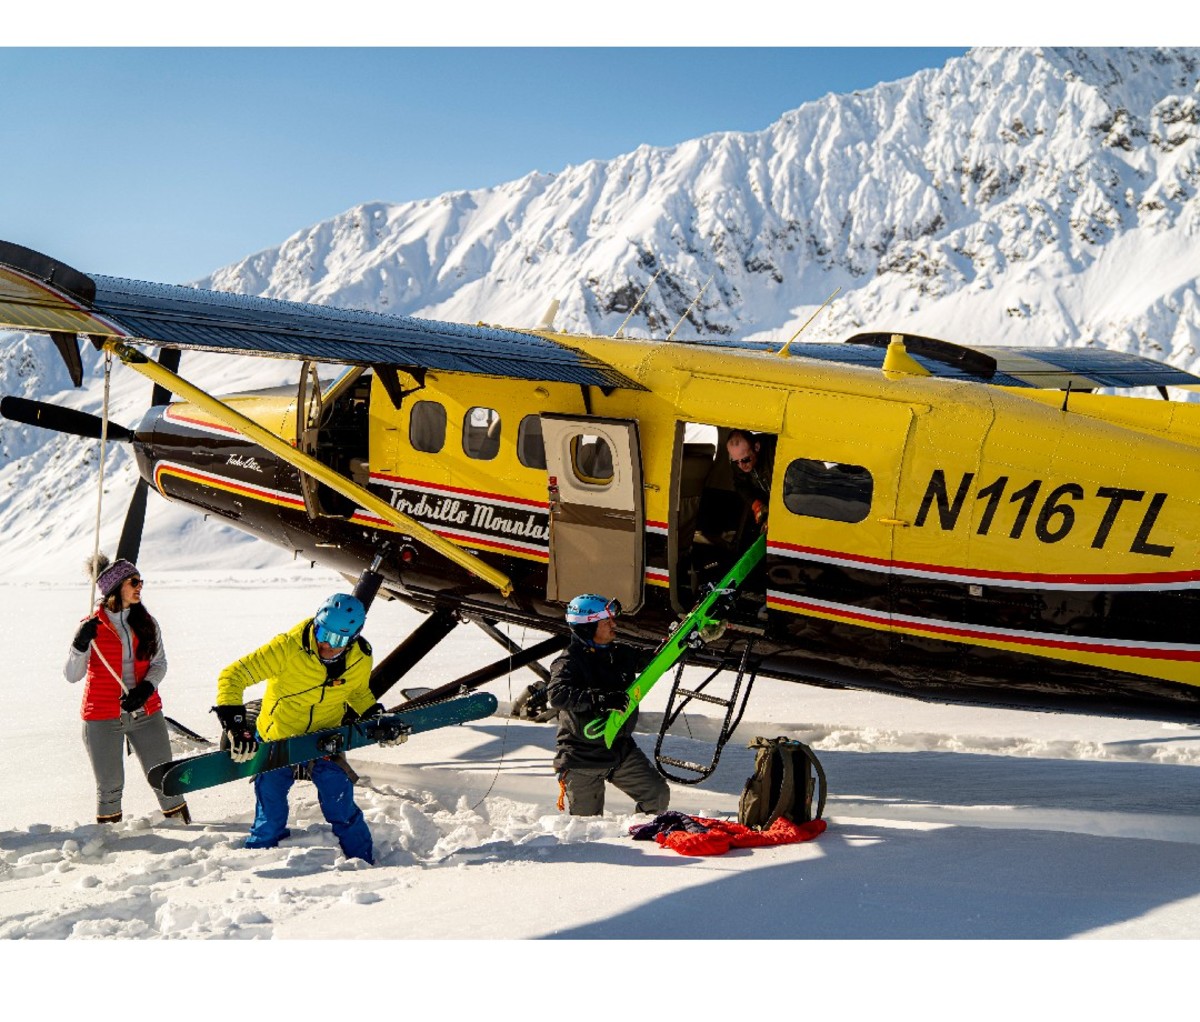 Heli-ski clients and guides unload small twin-engine plane at the top of the mountain in Alaska